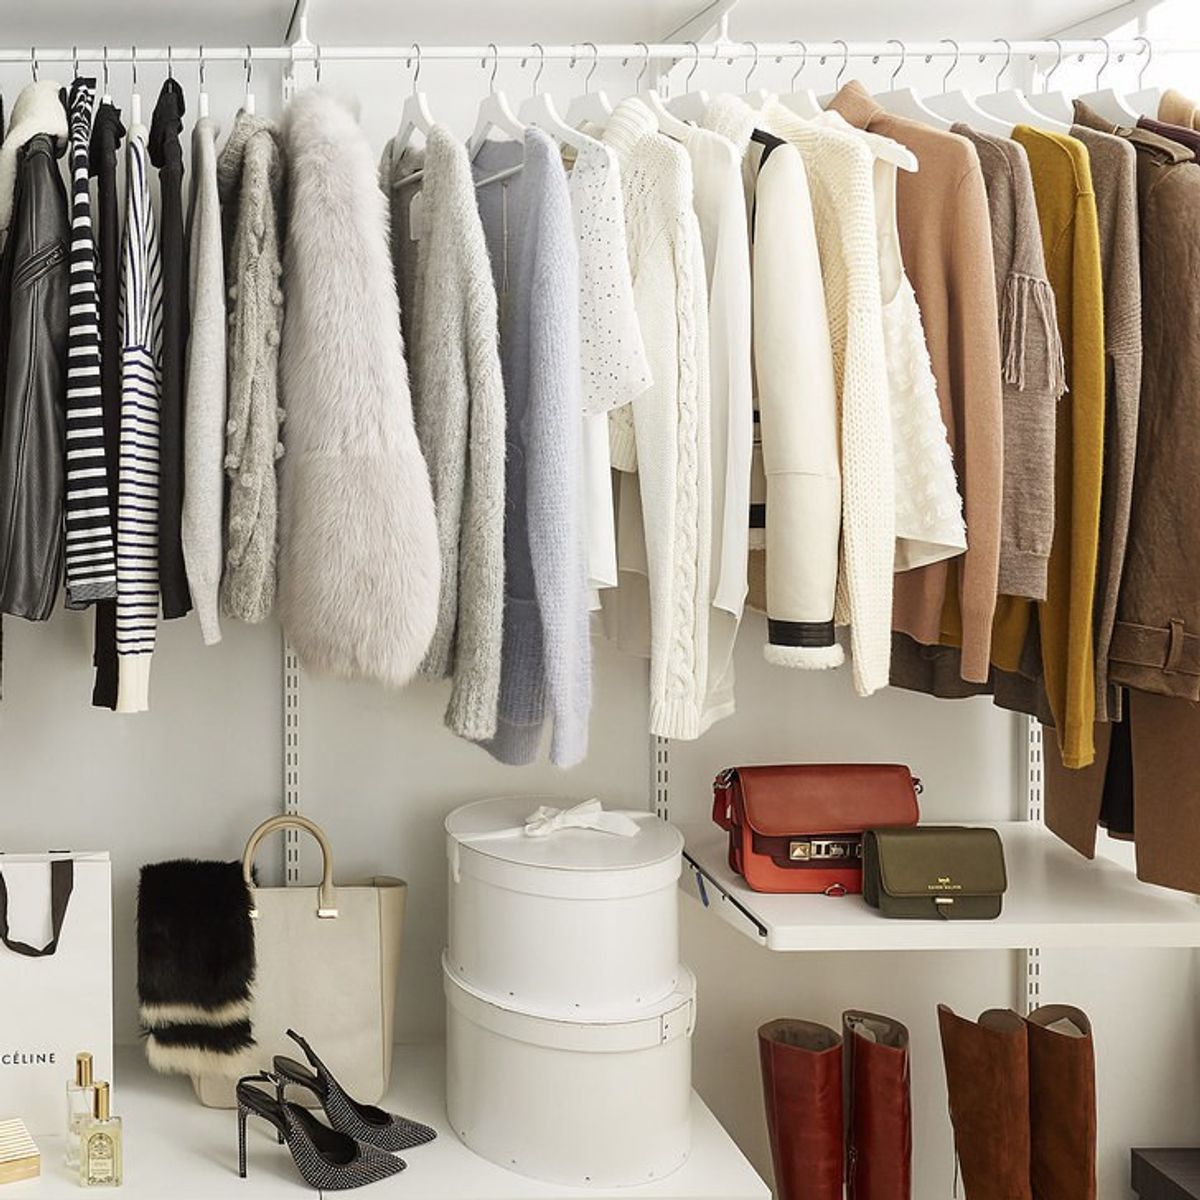 5 Things To Purge From Our Closets